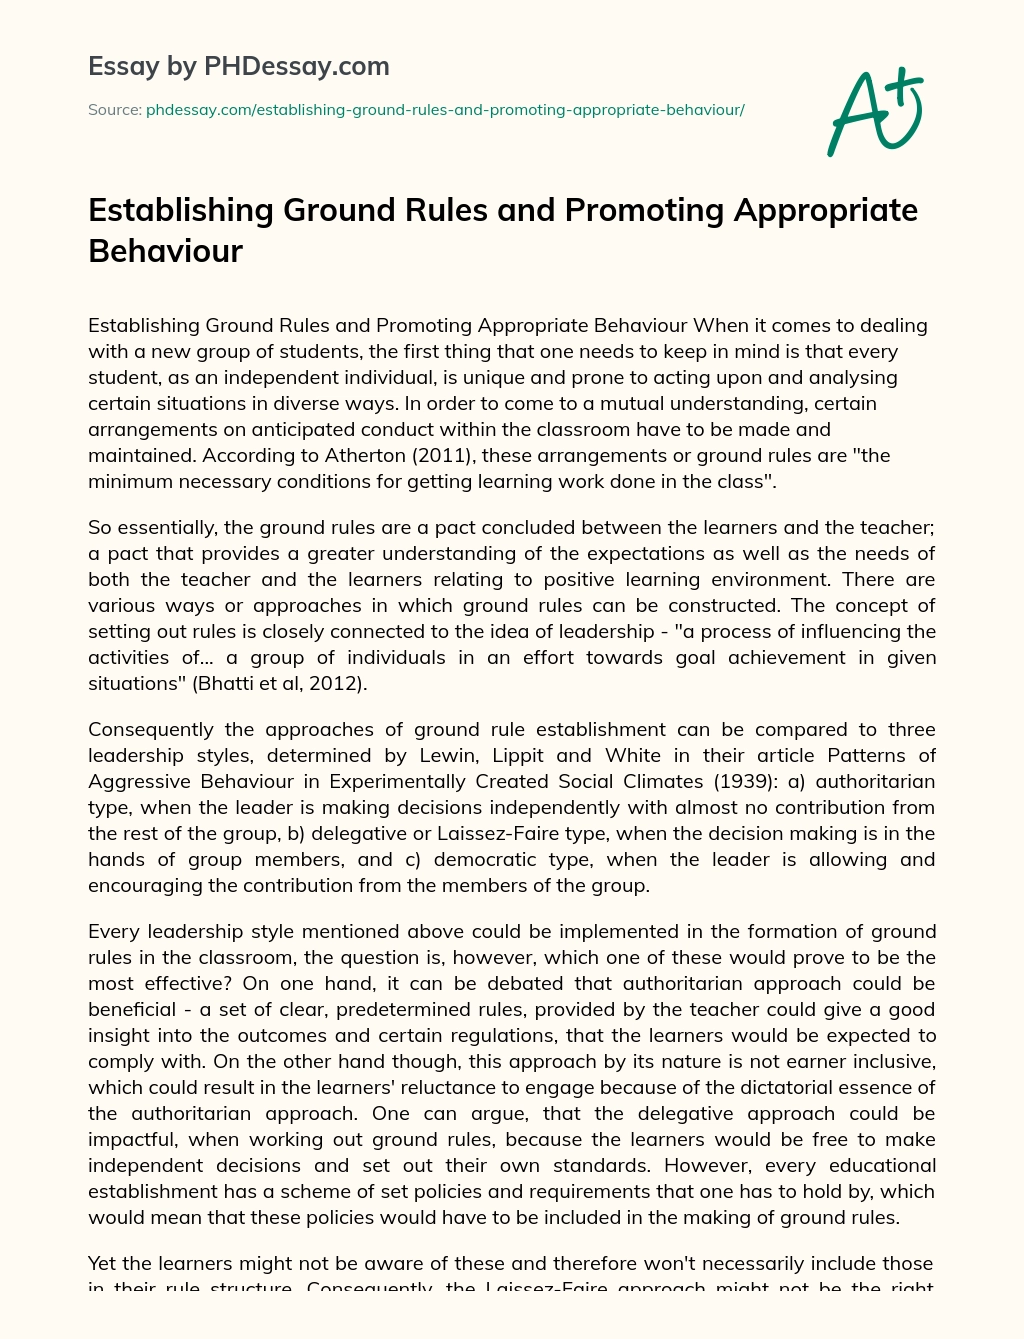 Establishing Ground Rules and Promoting Appropriate Behaviour essay